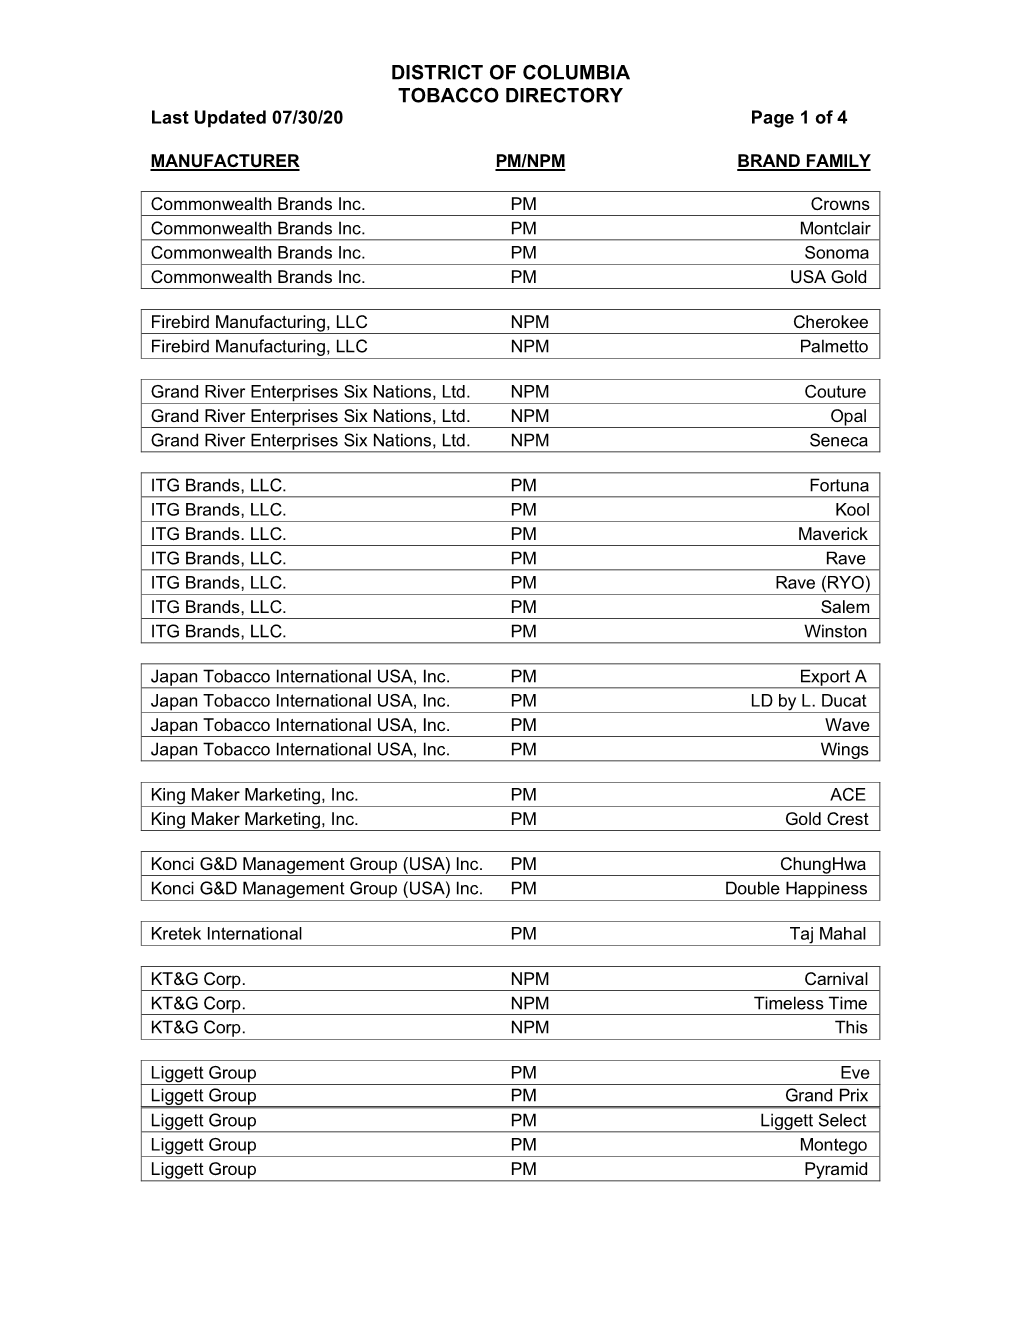 DISTRICT of COLUMBIA TOBACCO DIRECTORY Last Updated 07/30/20 Page 1 of 4